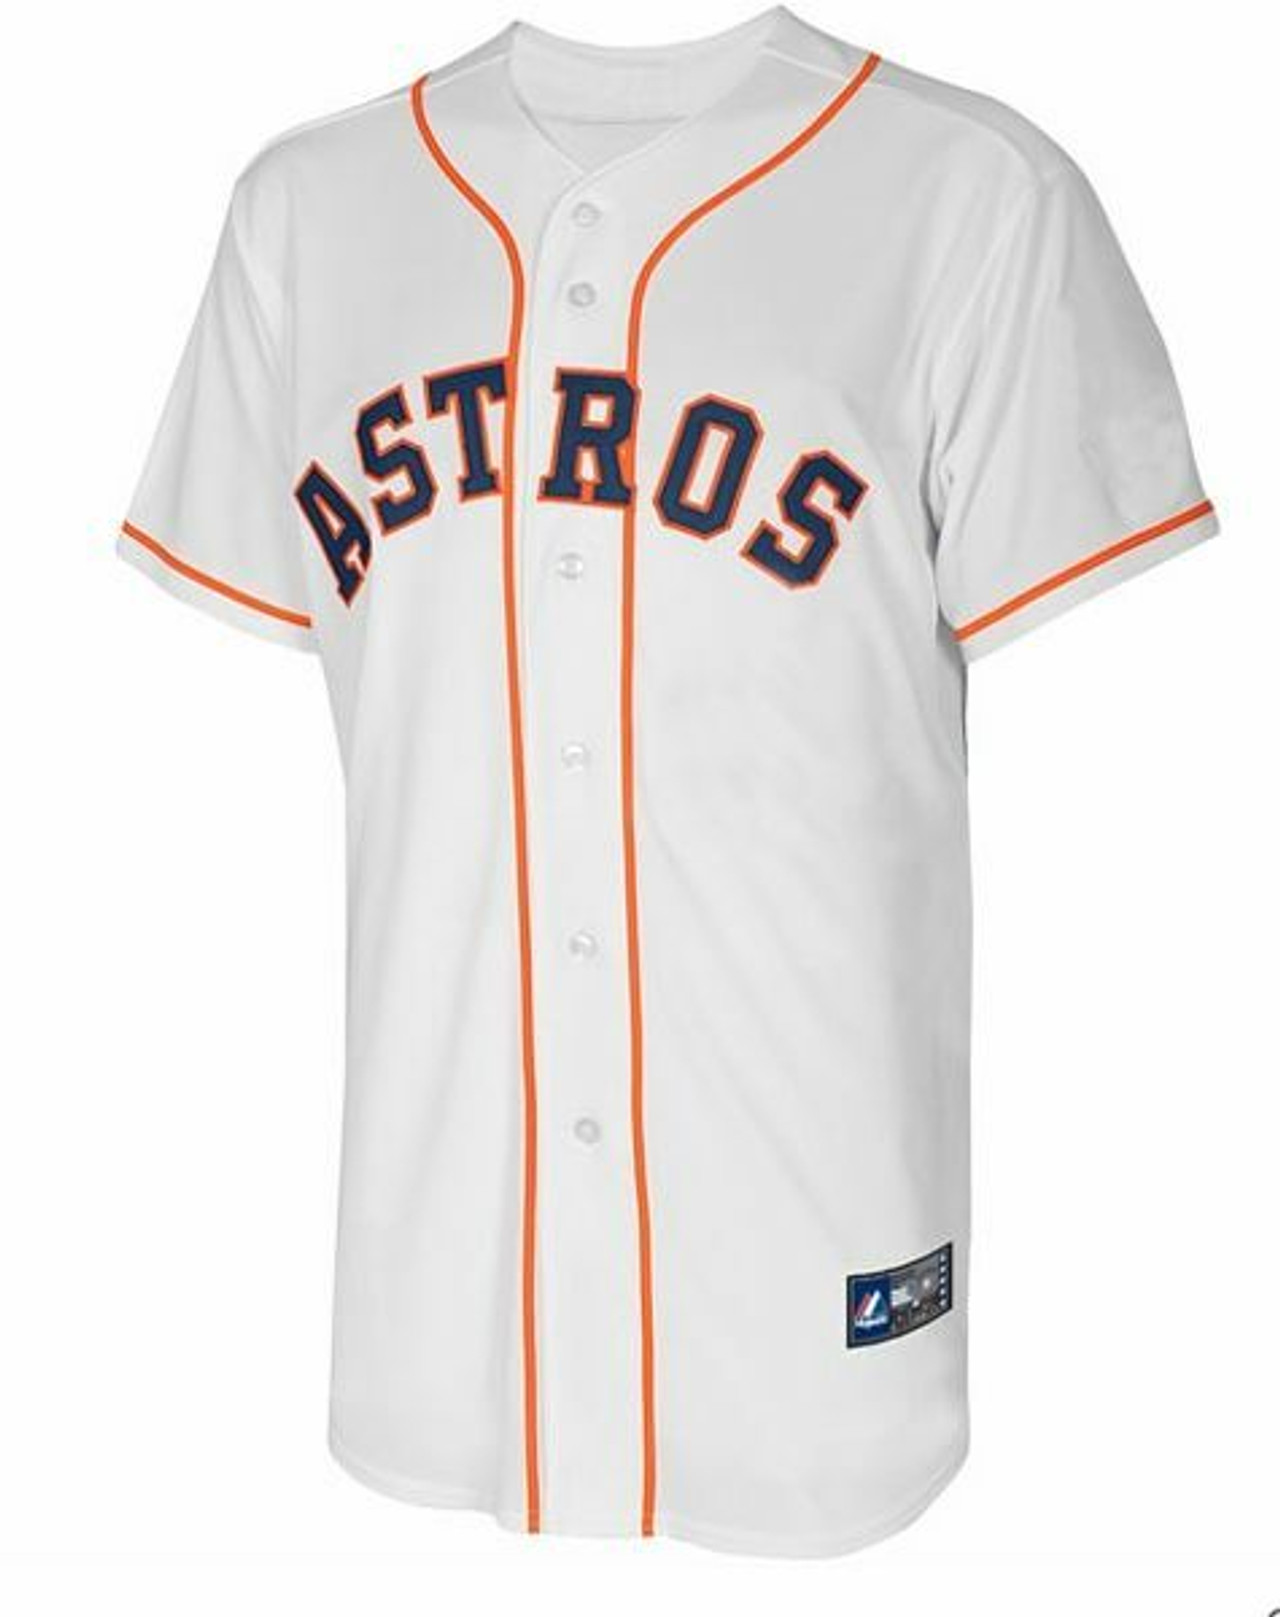 Houston Astros Shirt Legend Signatures Go 'Stros Gift - Personalized Gifts:  Family, Sports, Occasions, Trending